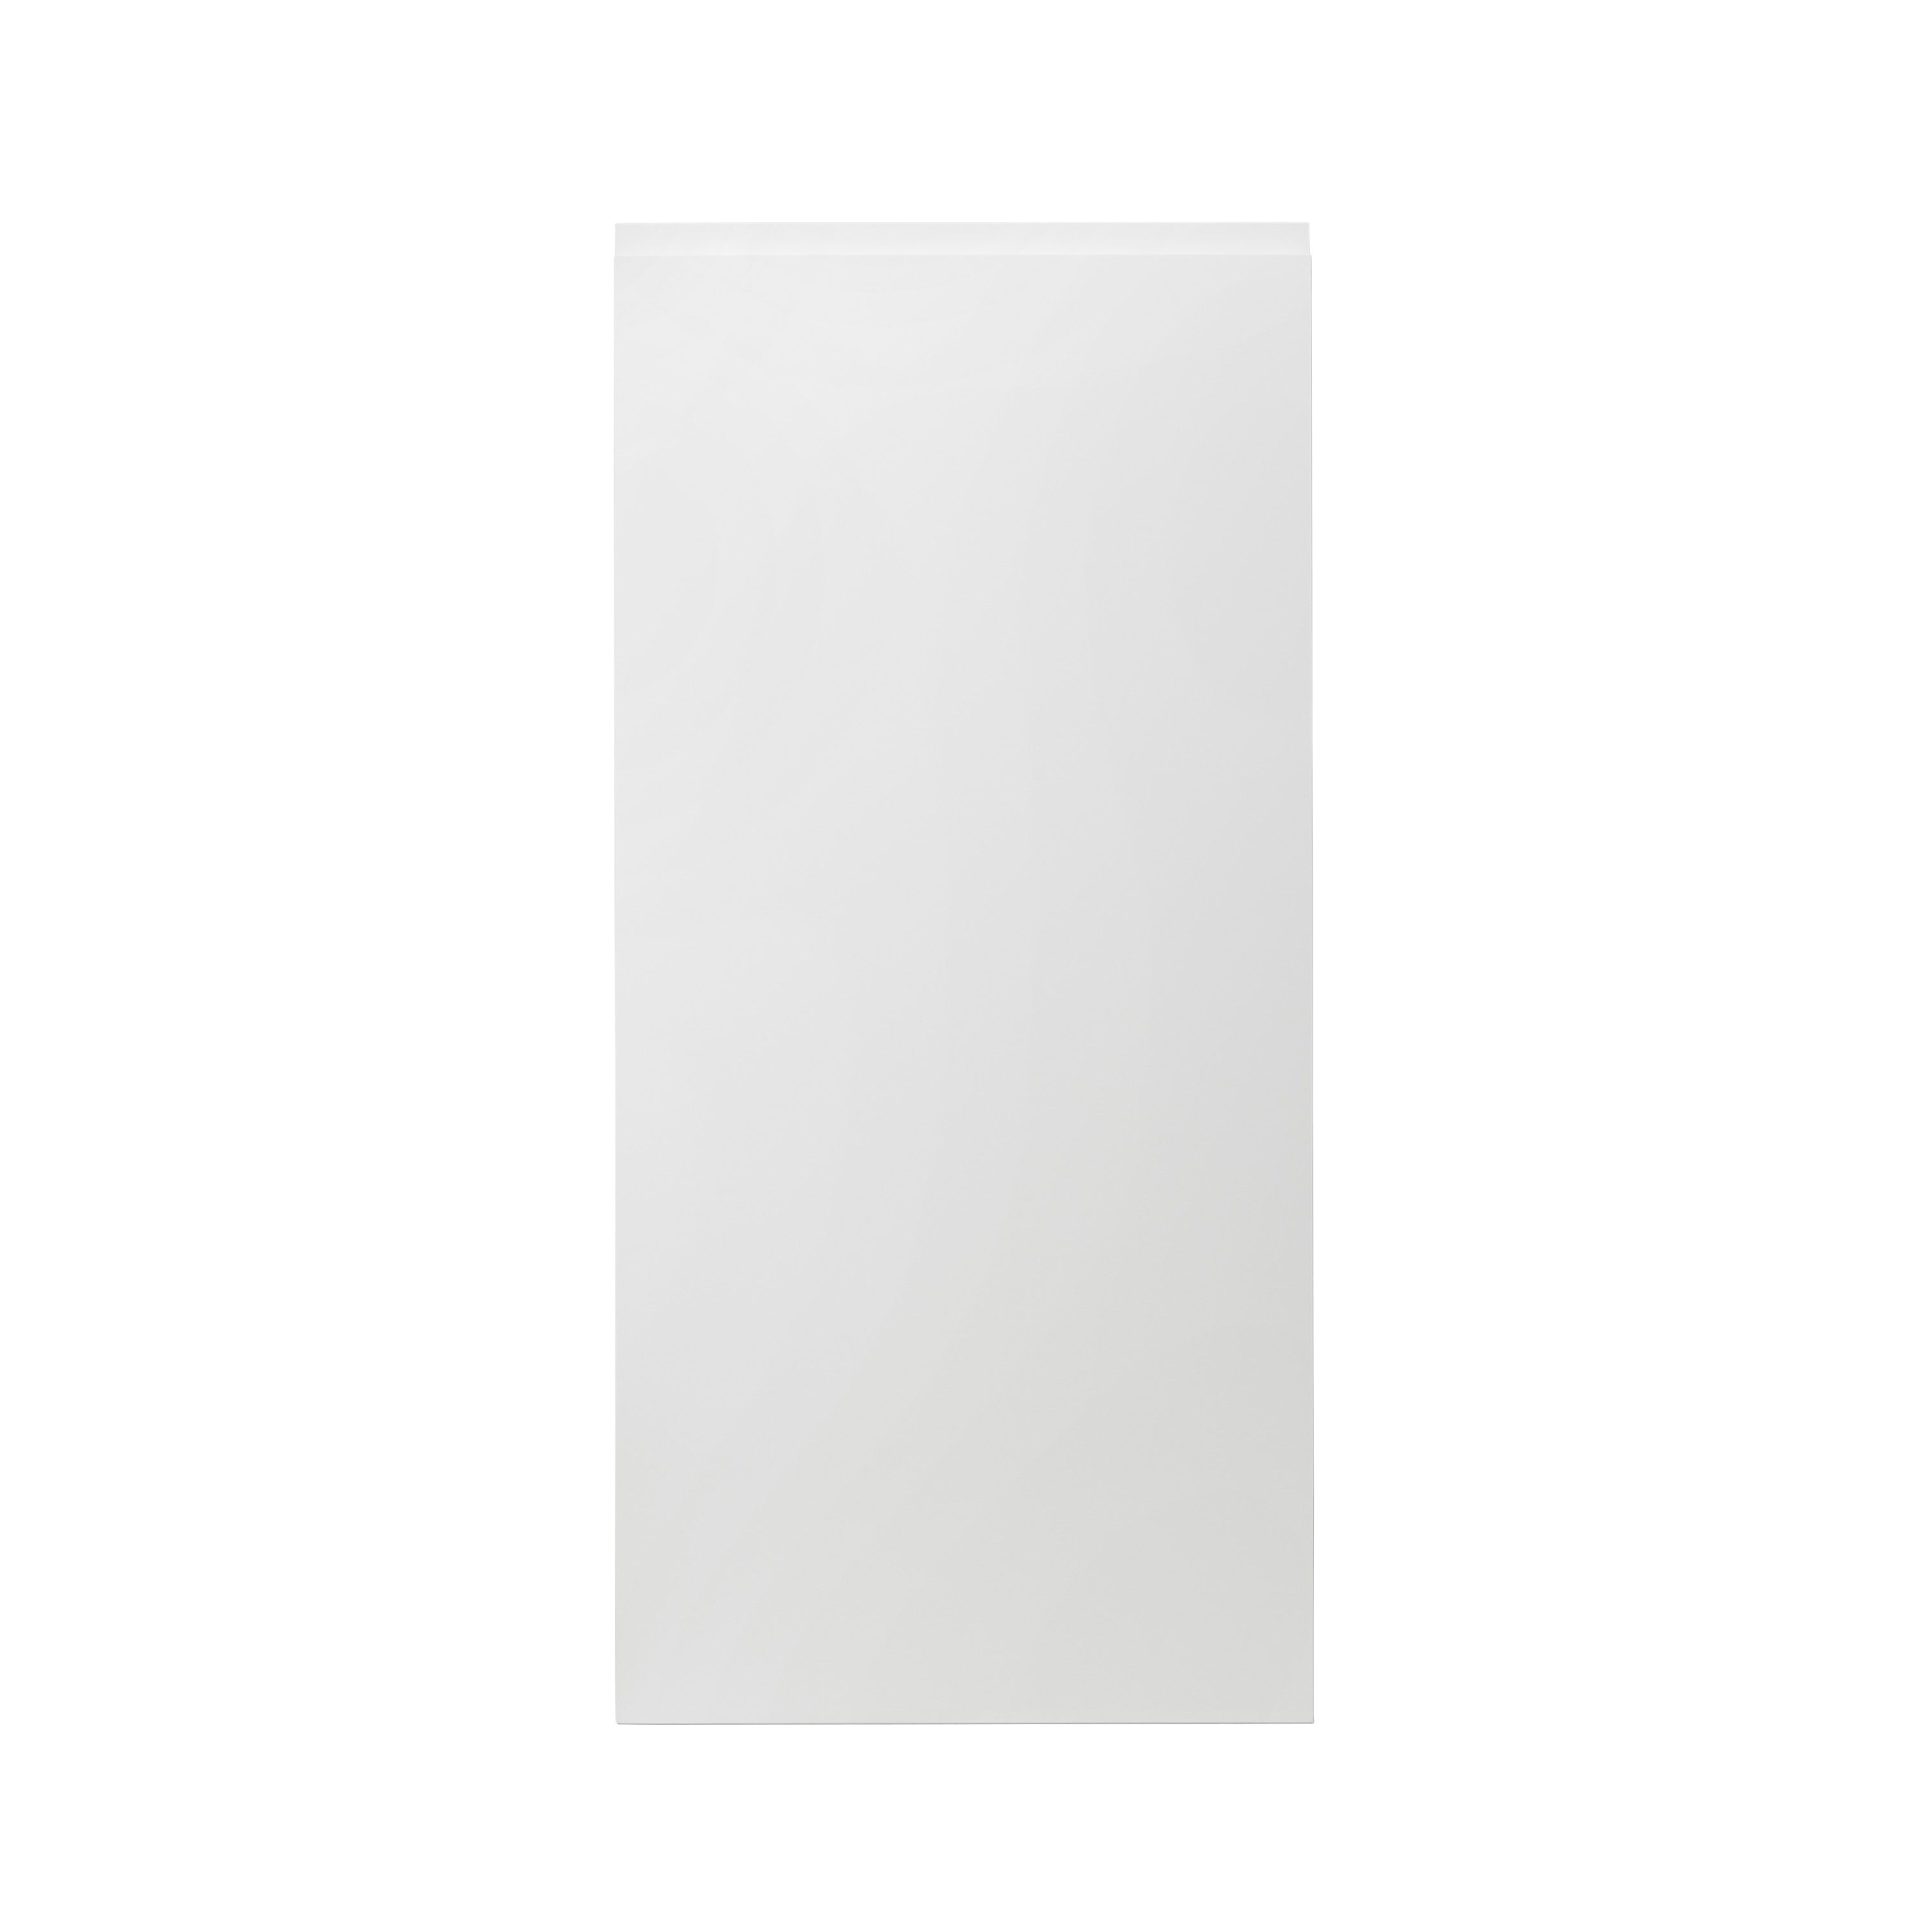 GoodHome Garcinia Gloss white integrated handle 70:30 Larder Cabinet door (W)600mm (H)1287mm (T)19mm